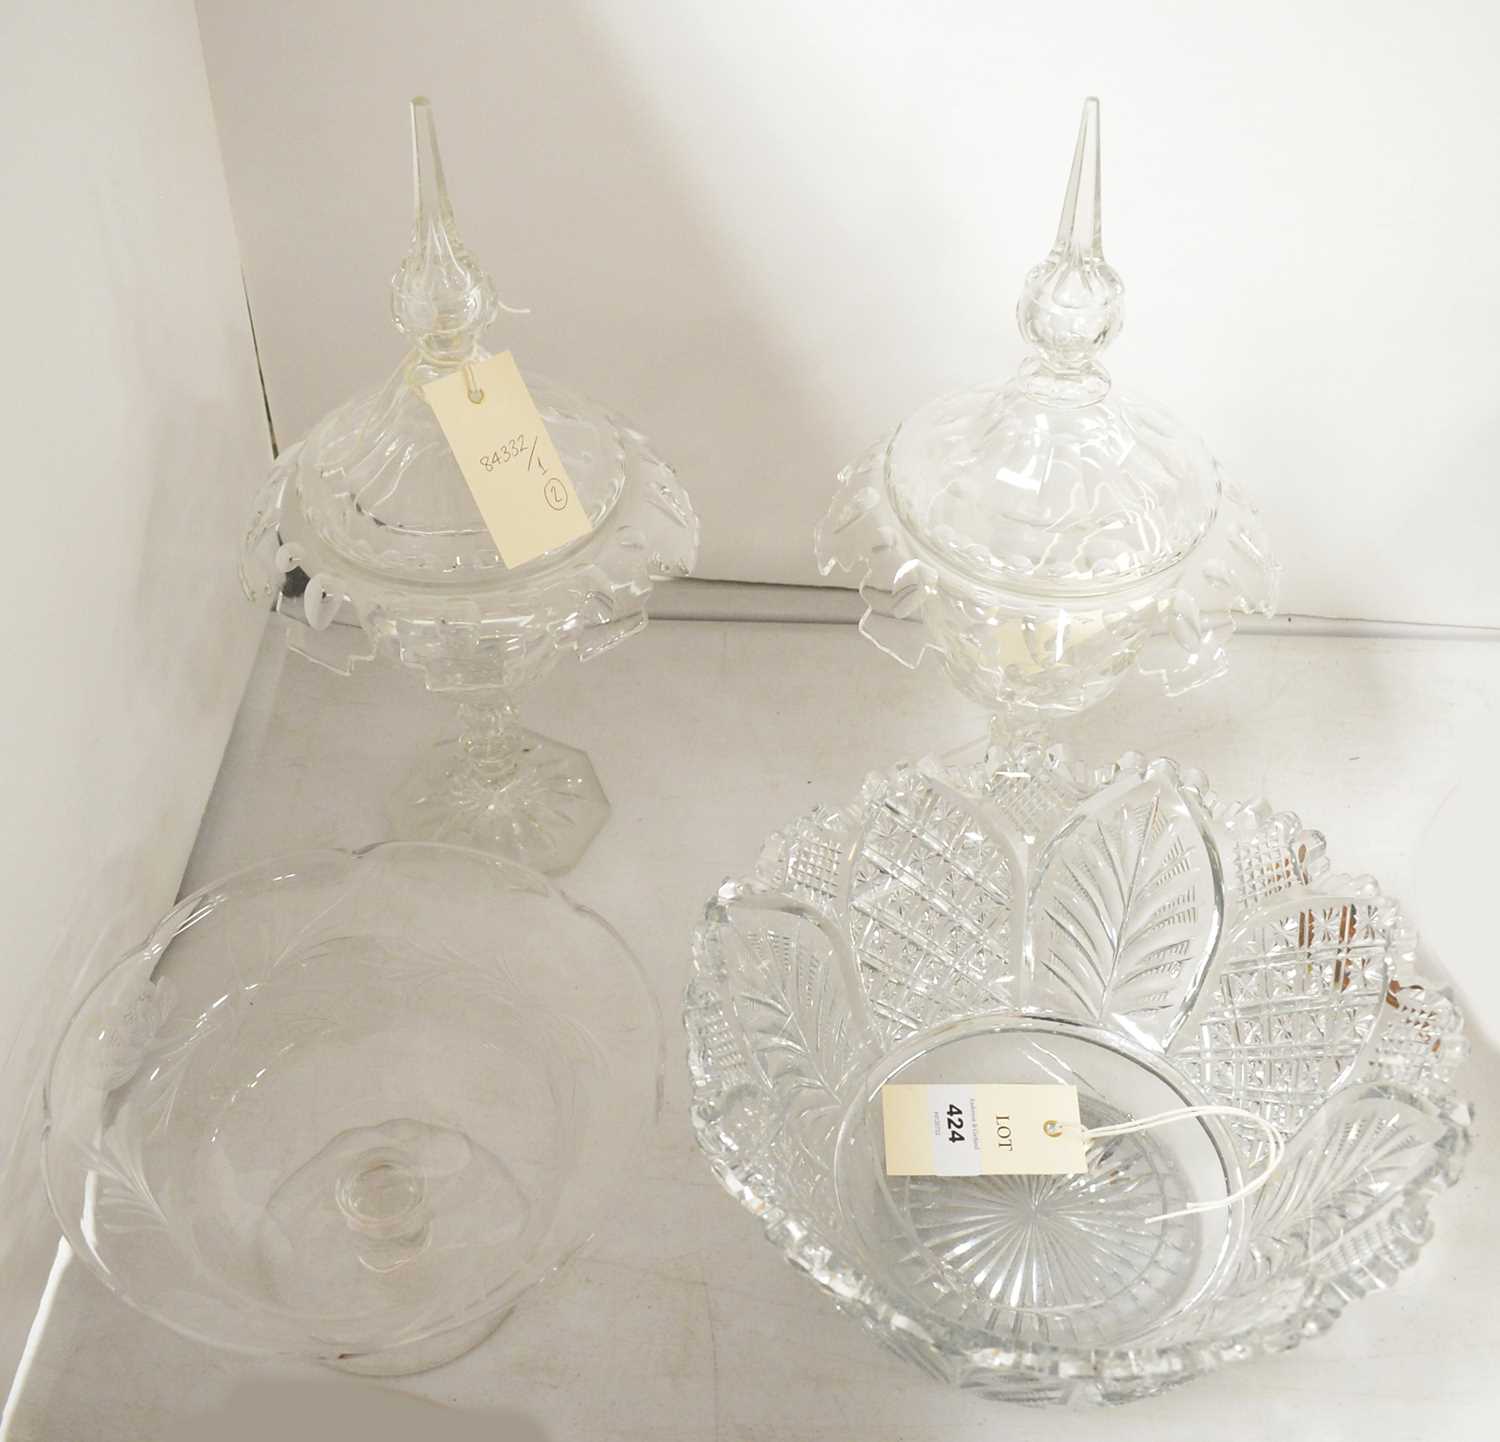 A selection of cut glass dishes and bowls.